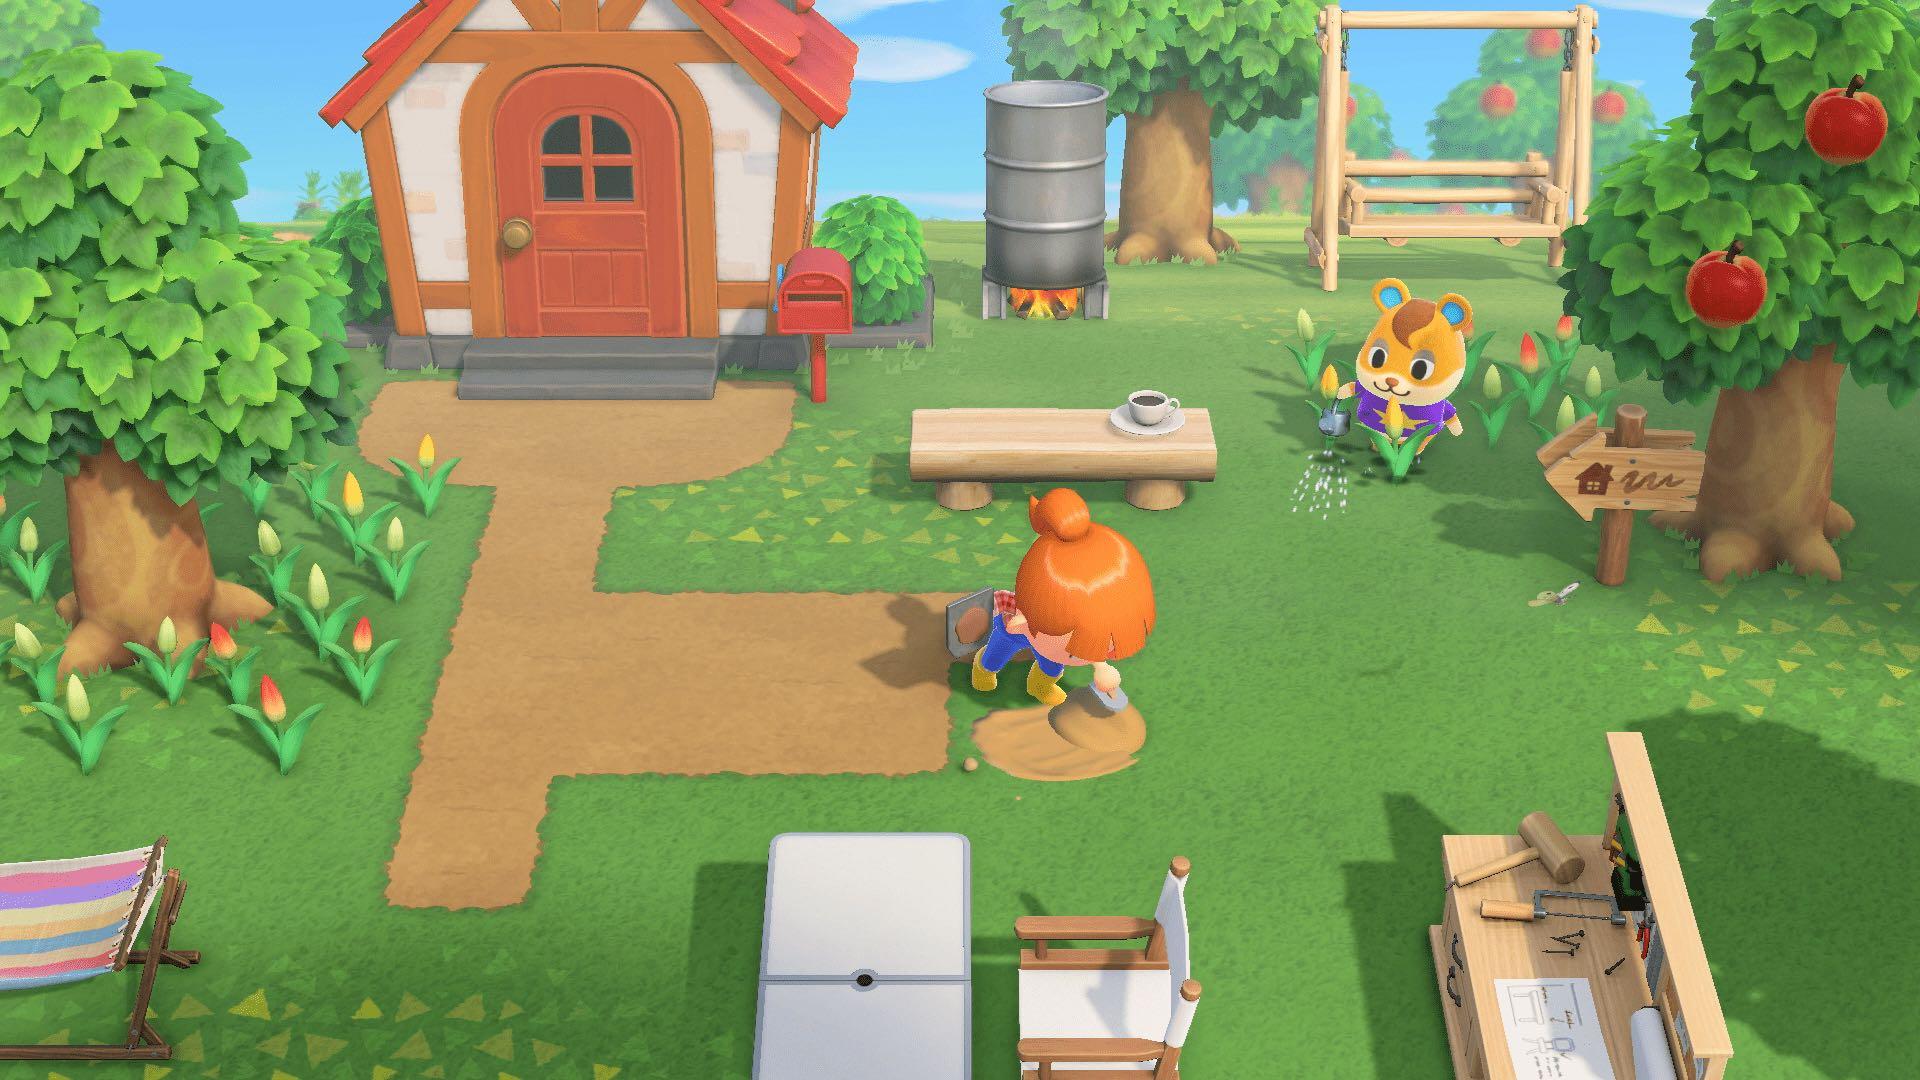 Amid pandemic, Animal Crossing gamers create dreamy ‘islands,’ travel